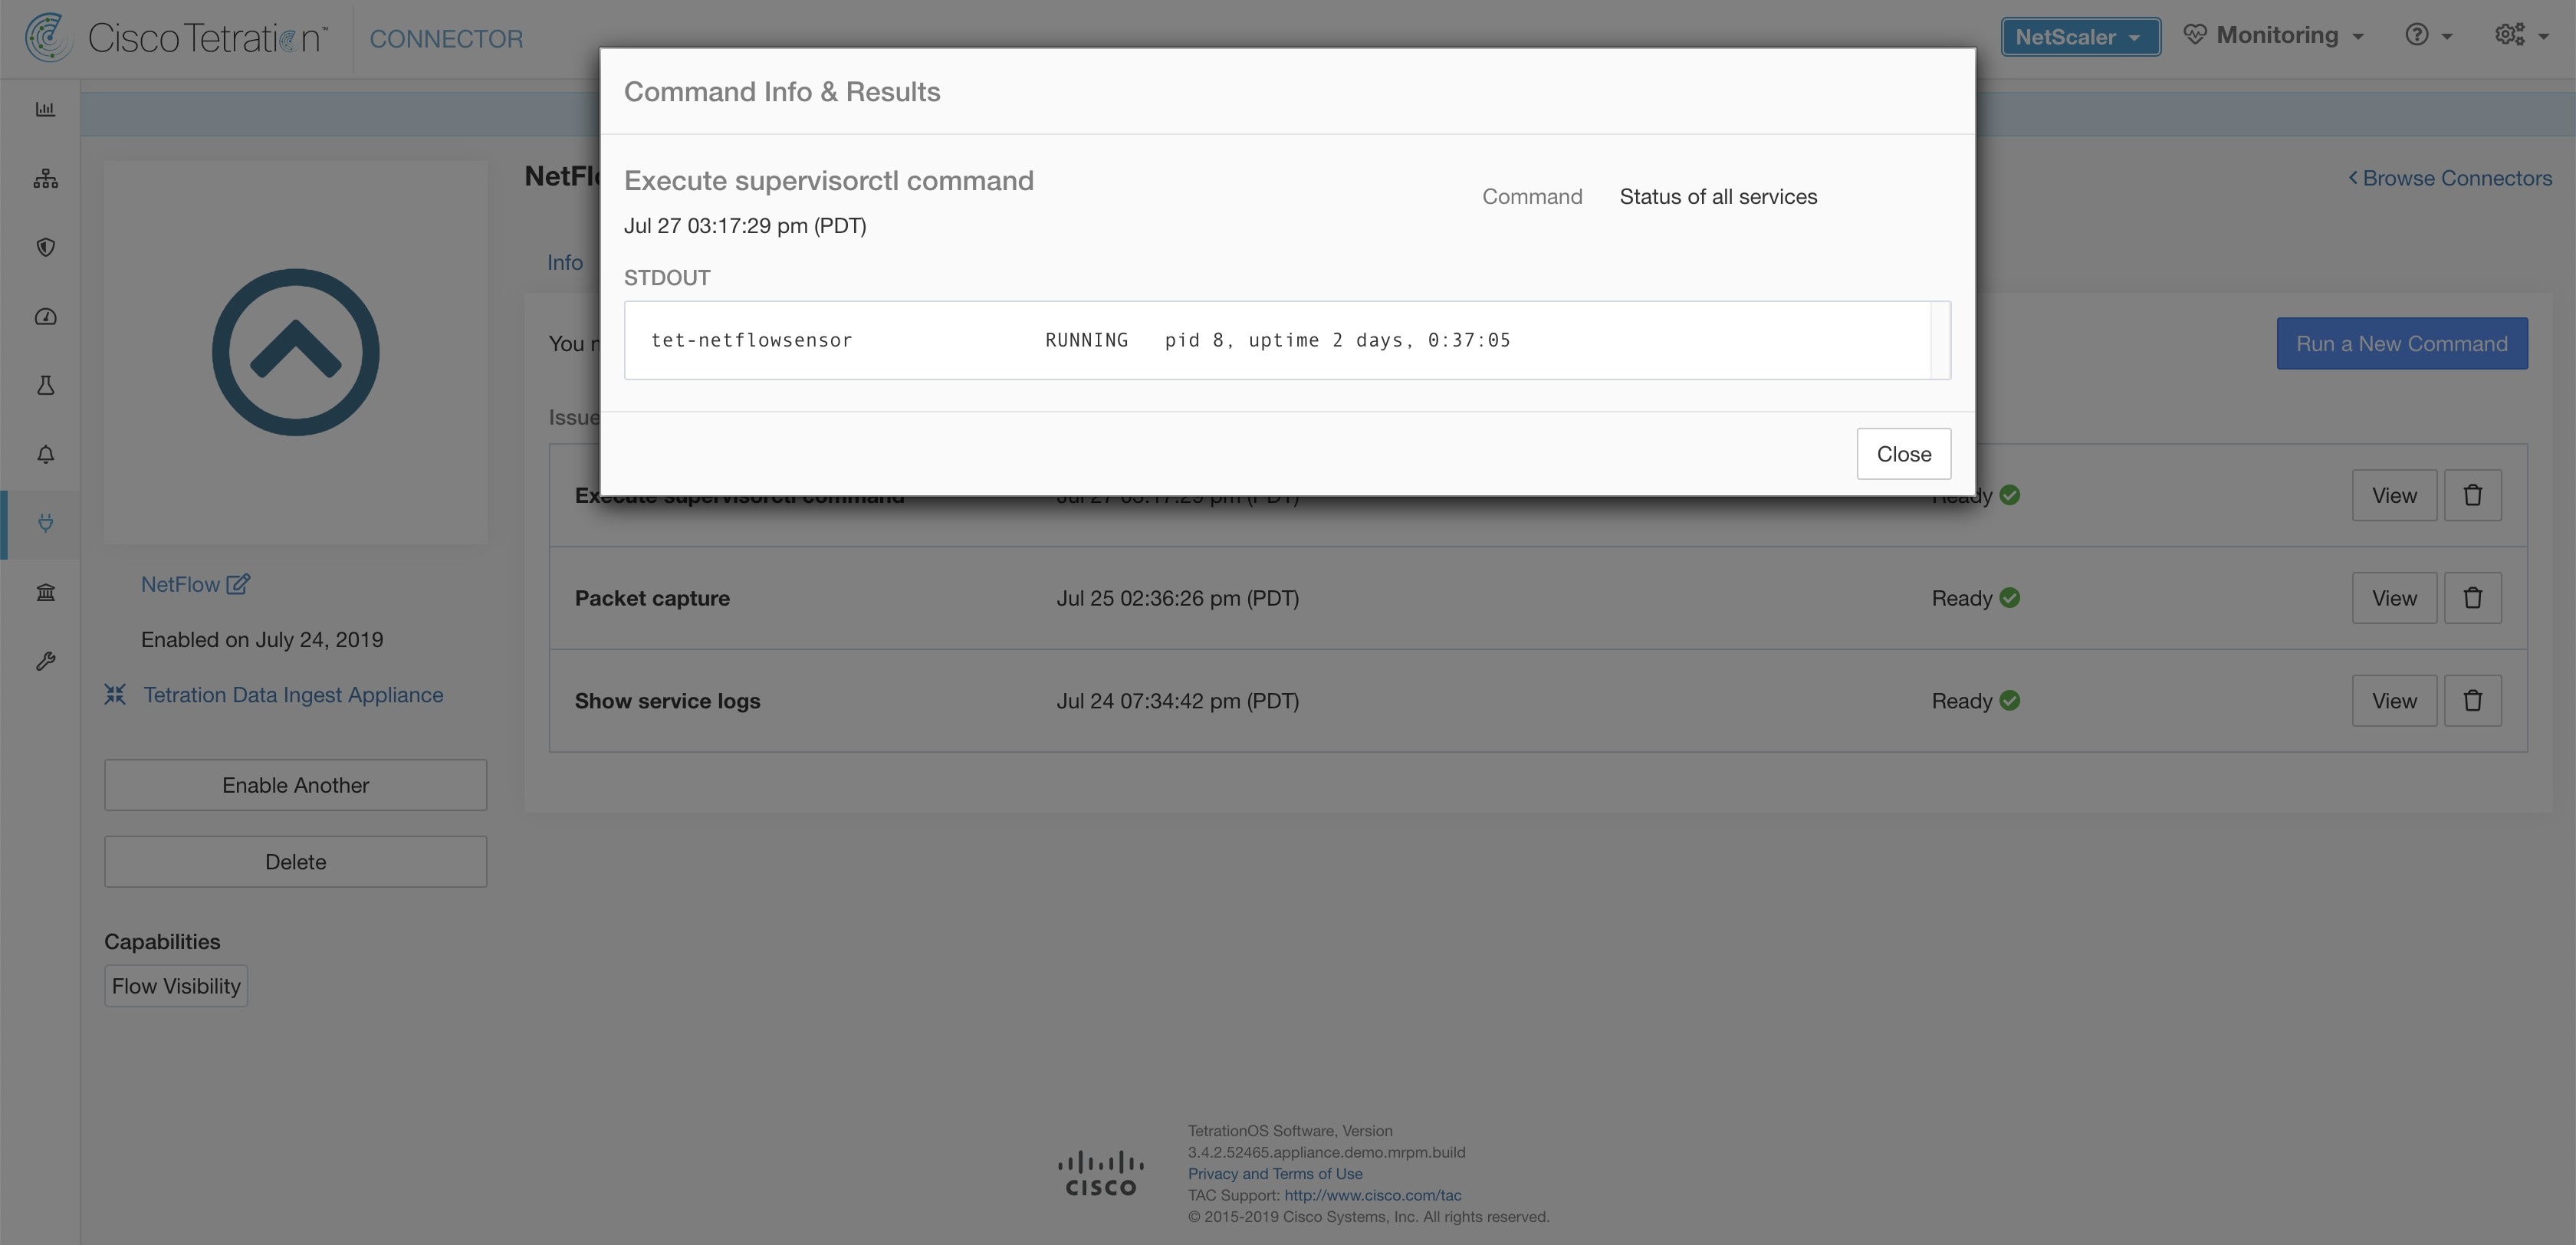 Execute supervisorctl command on NetFlow connector to get the status of all services